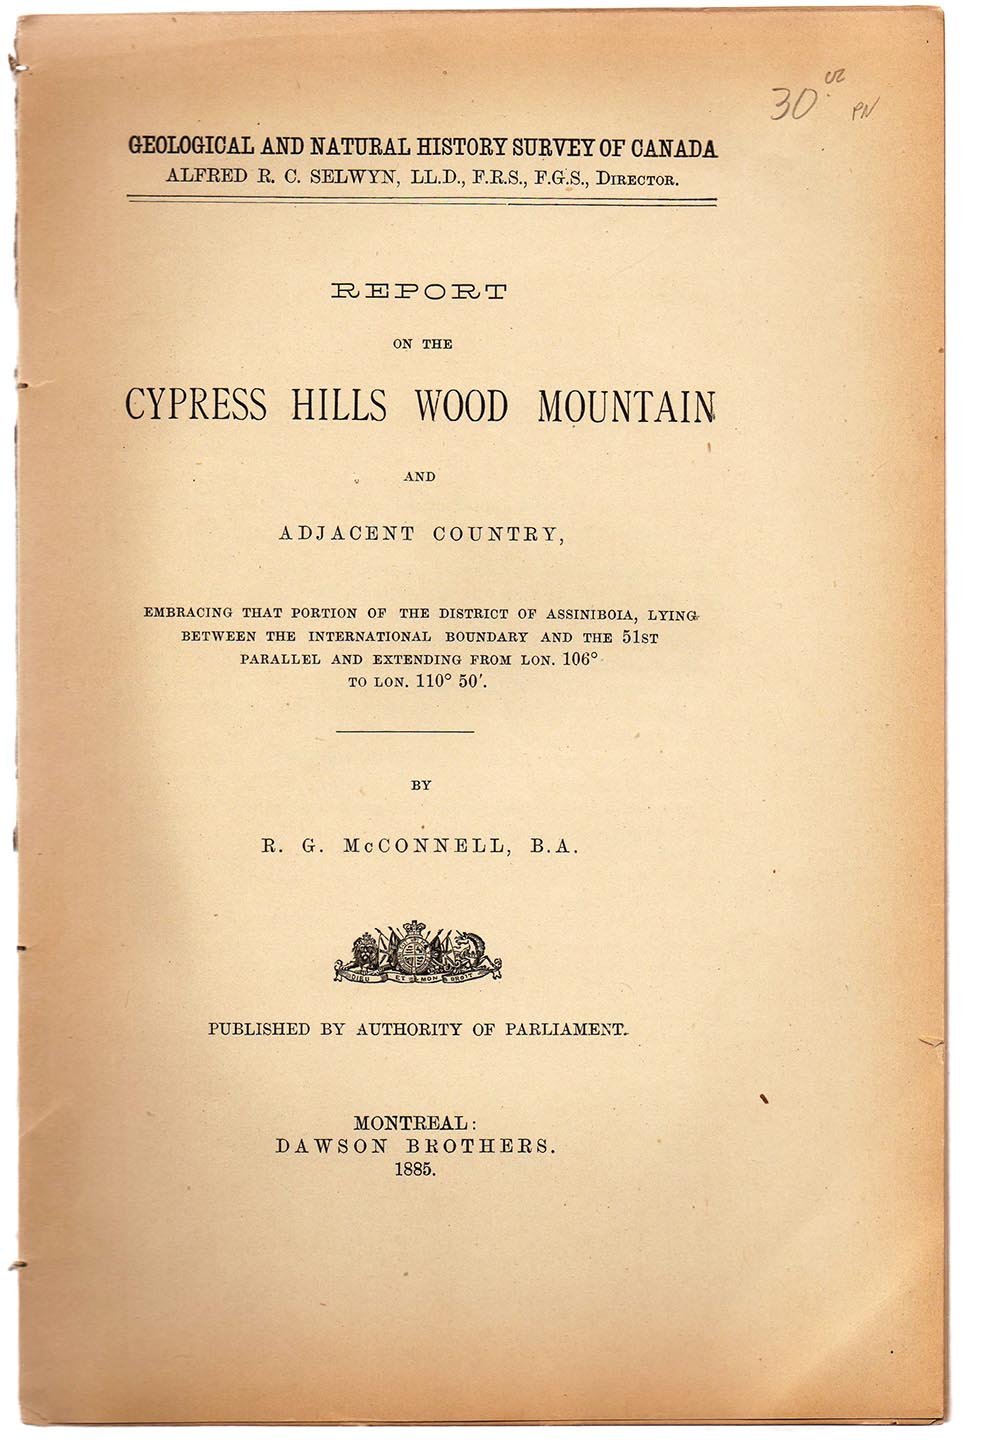 Report on the Cypress Hills Wood Mountain and Adjacent Country